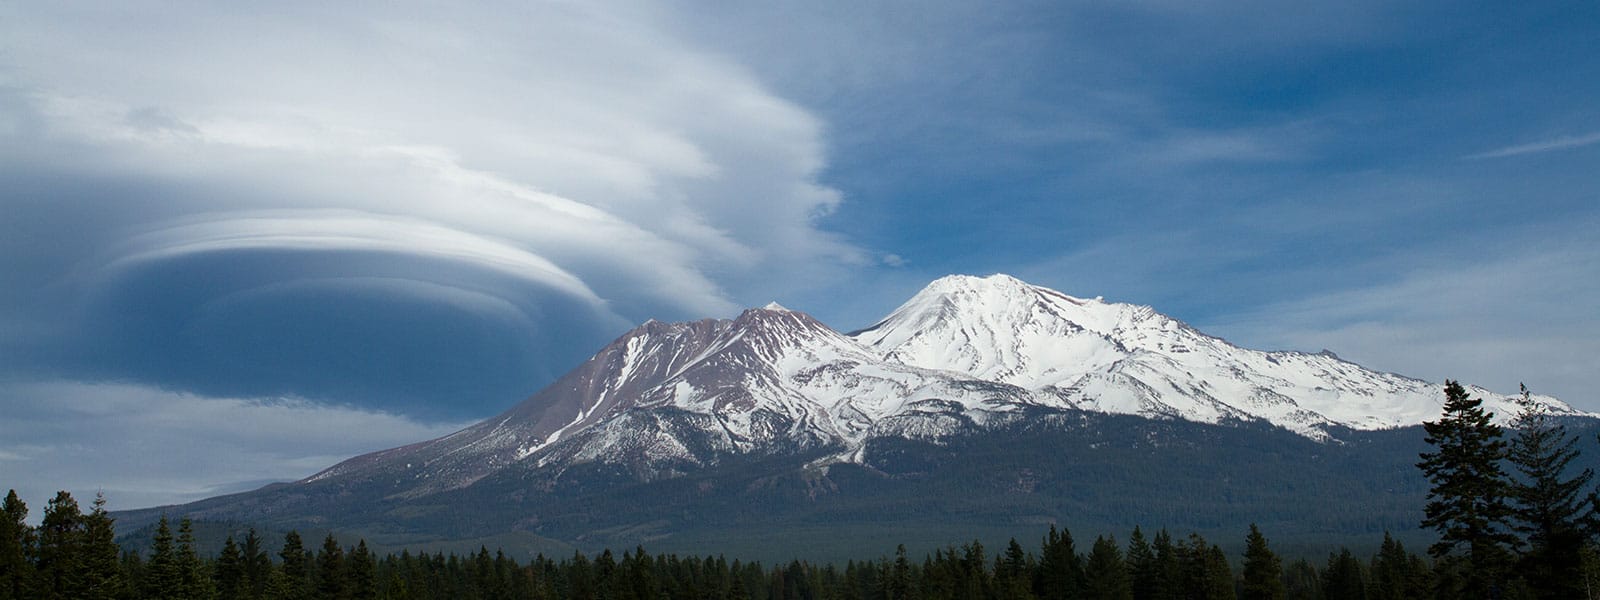 Mt-Shasta - The Mysteries And Legends of Mount Shasta